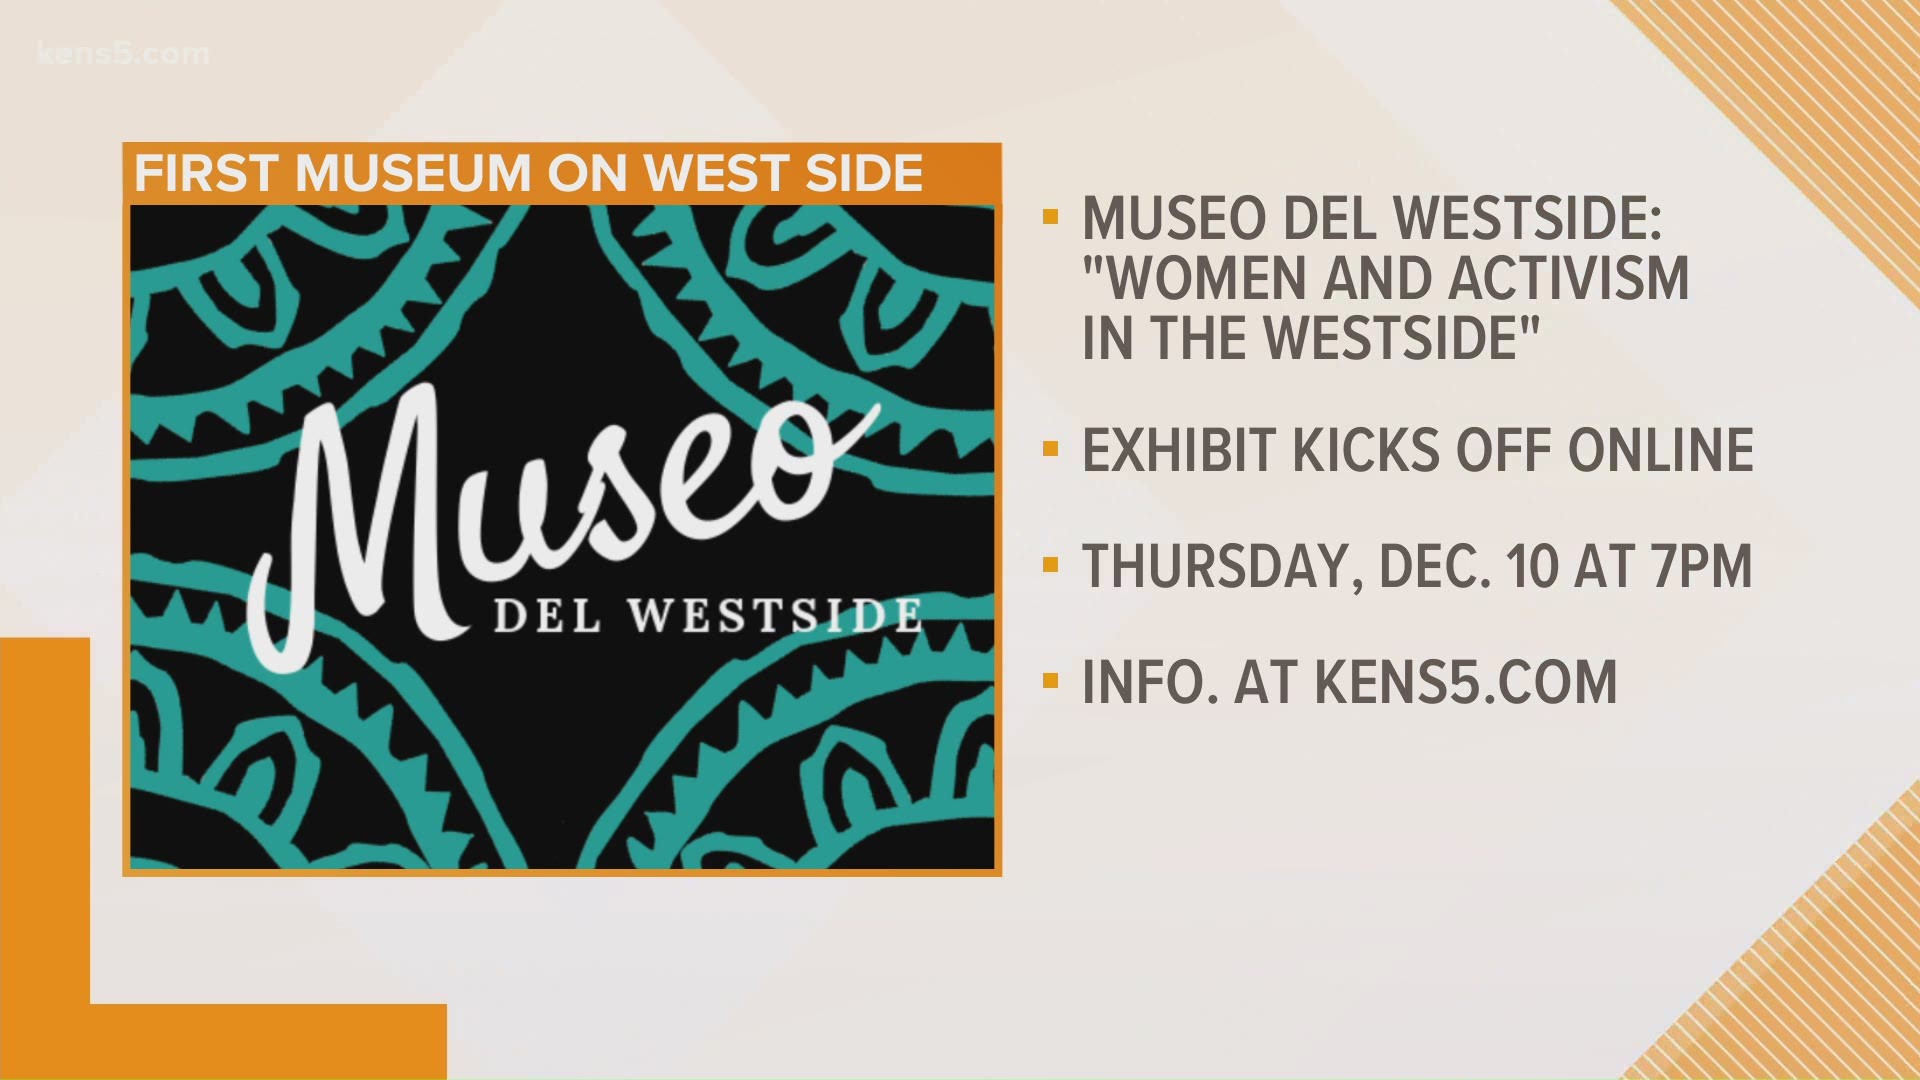 Work is being done to create the first of its kind museum on San Antonio’s west side.